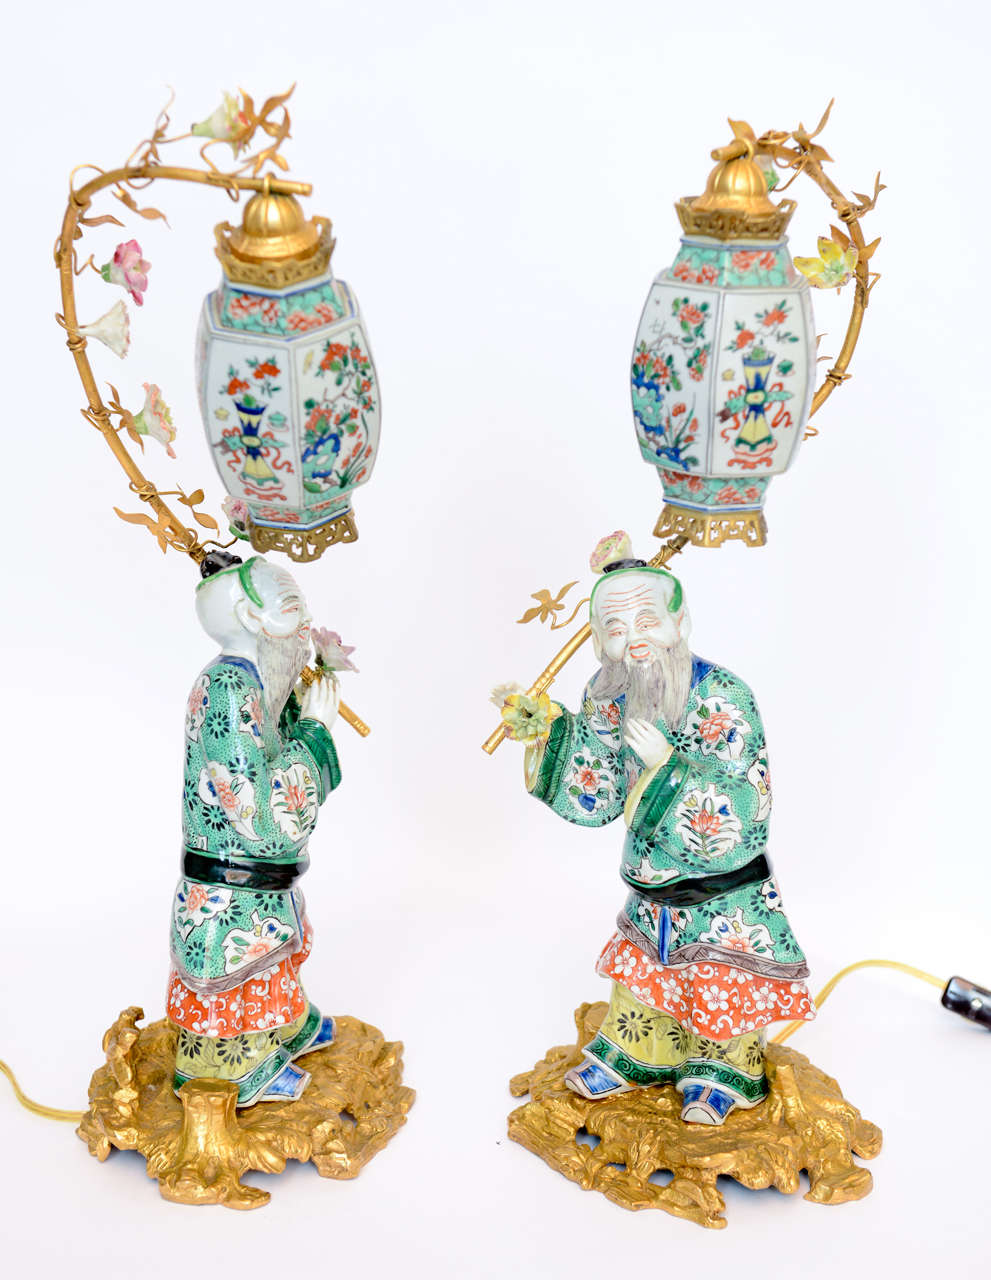 Pair Of Chinese Porcelain Figurines Holding Up Lanterns 1